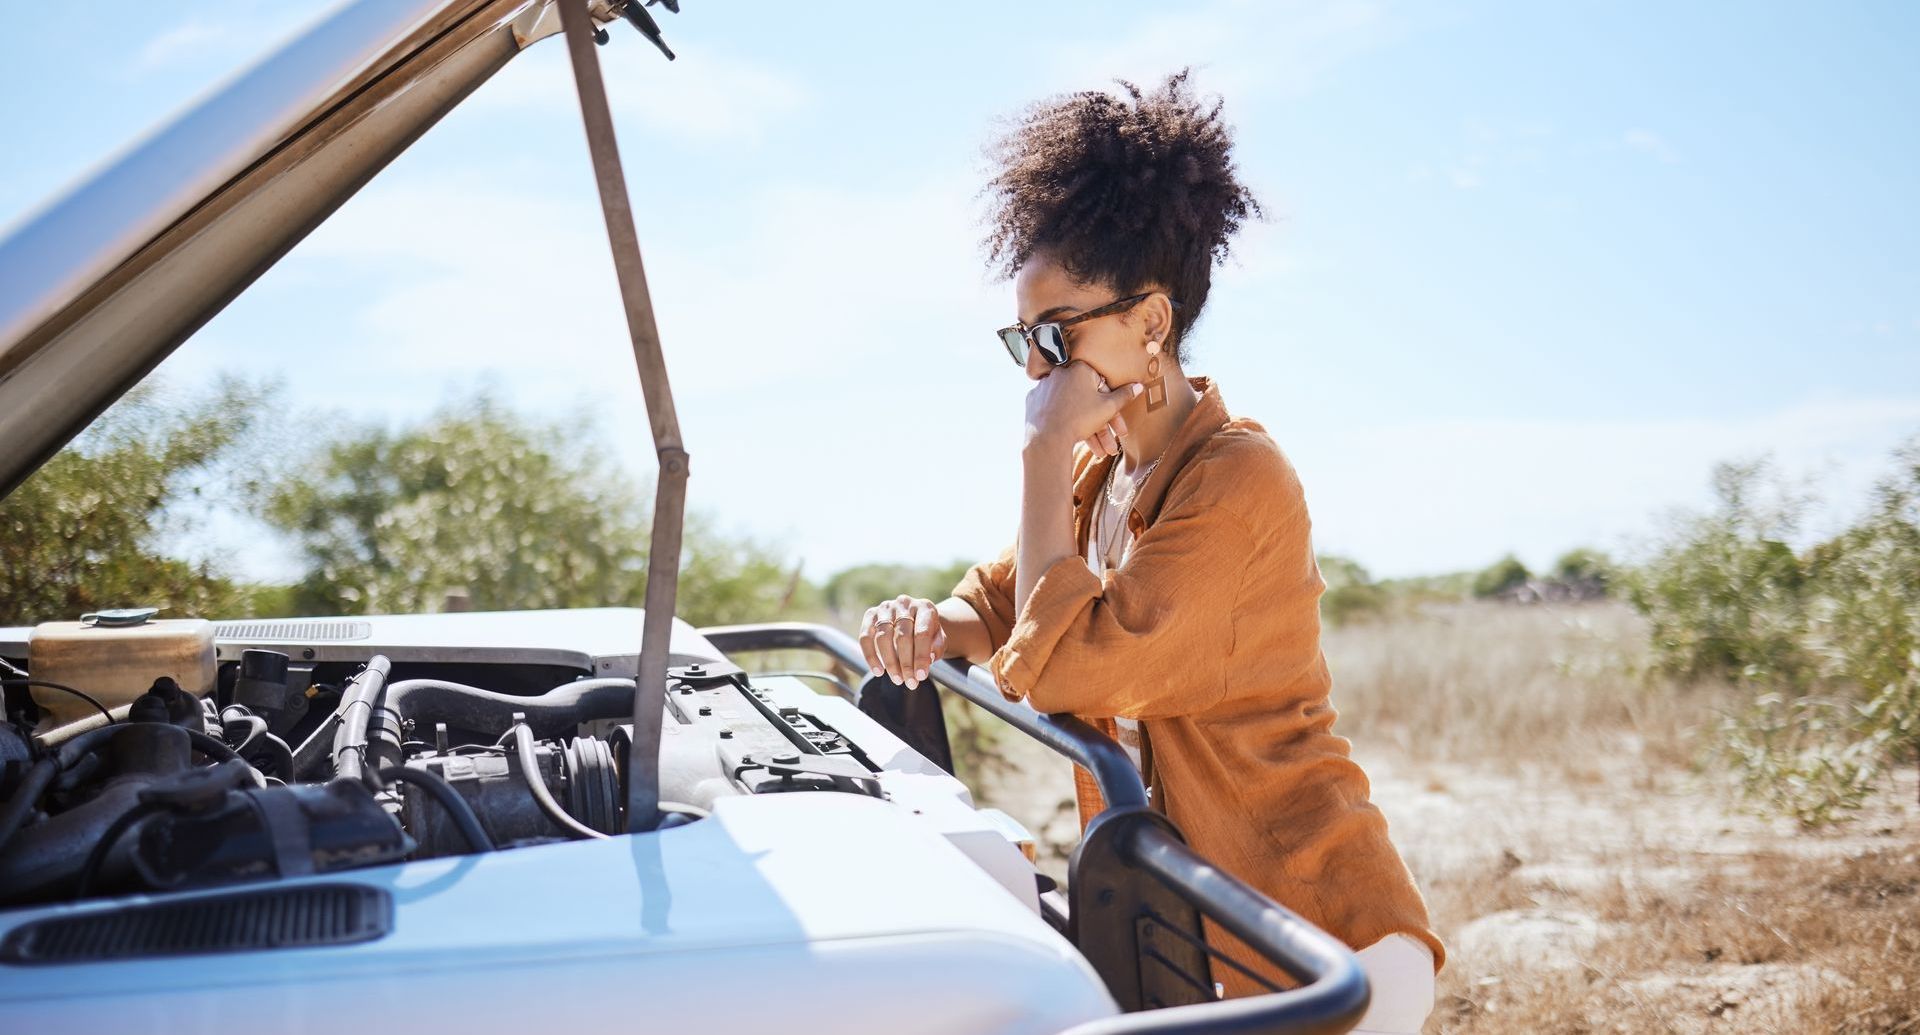 A woman examines her car's engine that's malfunctioning, contemplating the destination vs journey